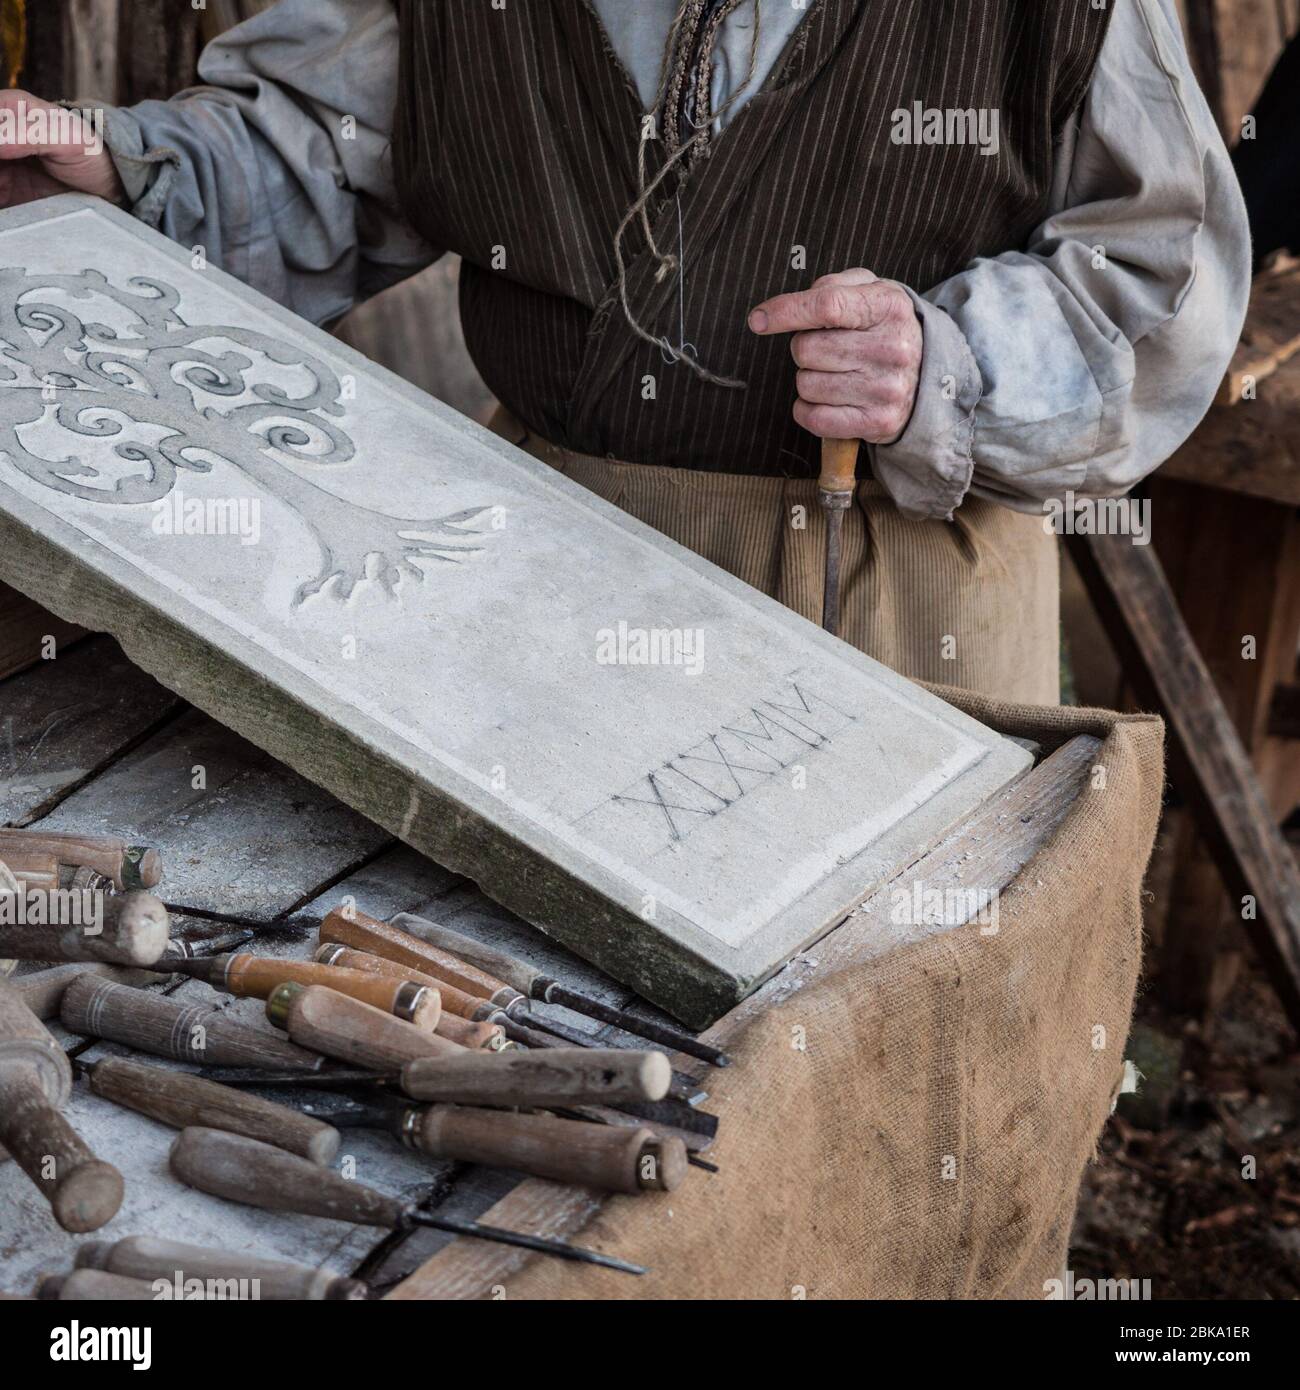 Vicenza, Italy - December 29, 2019: Stonemason carves and shapes the stone with a wooden hammer and chisel. Stock Photo